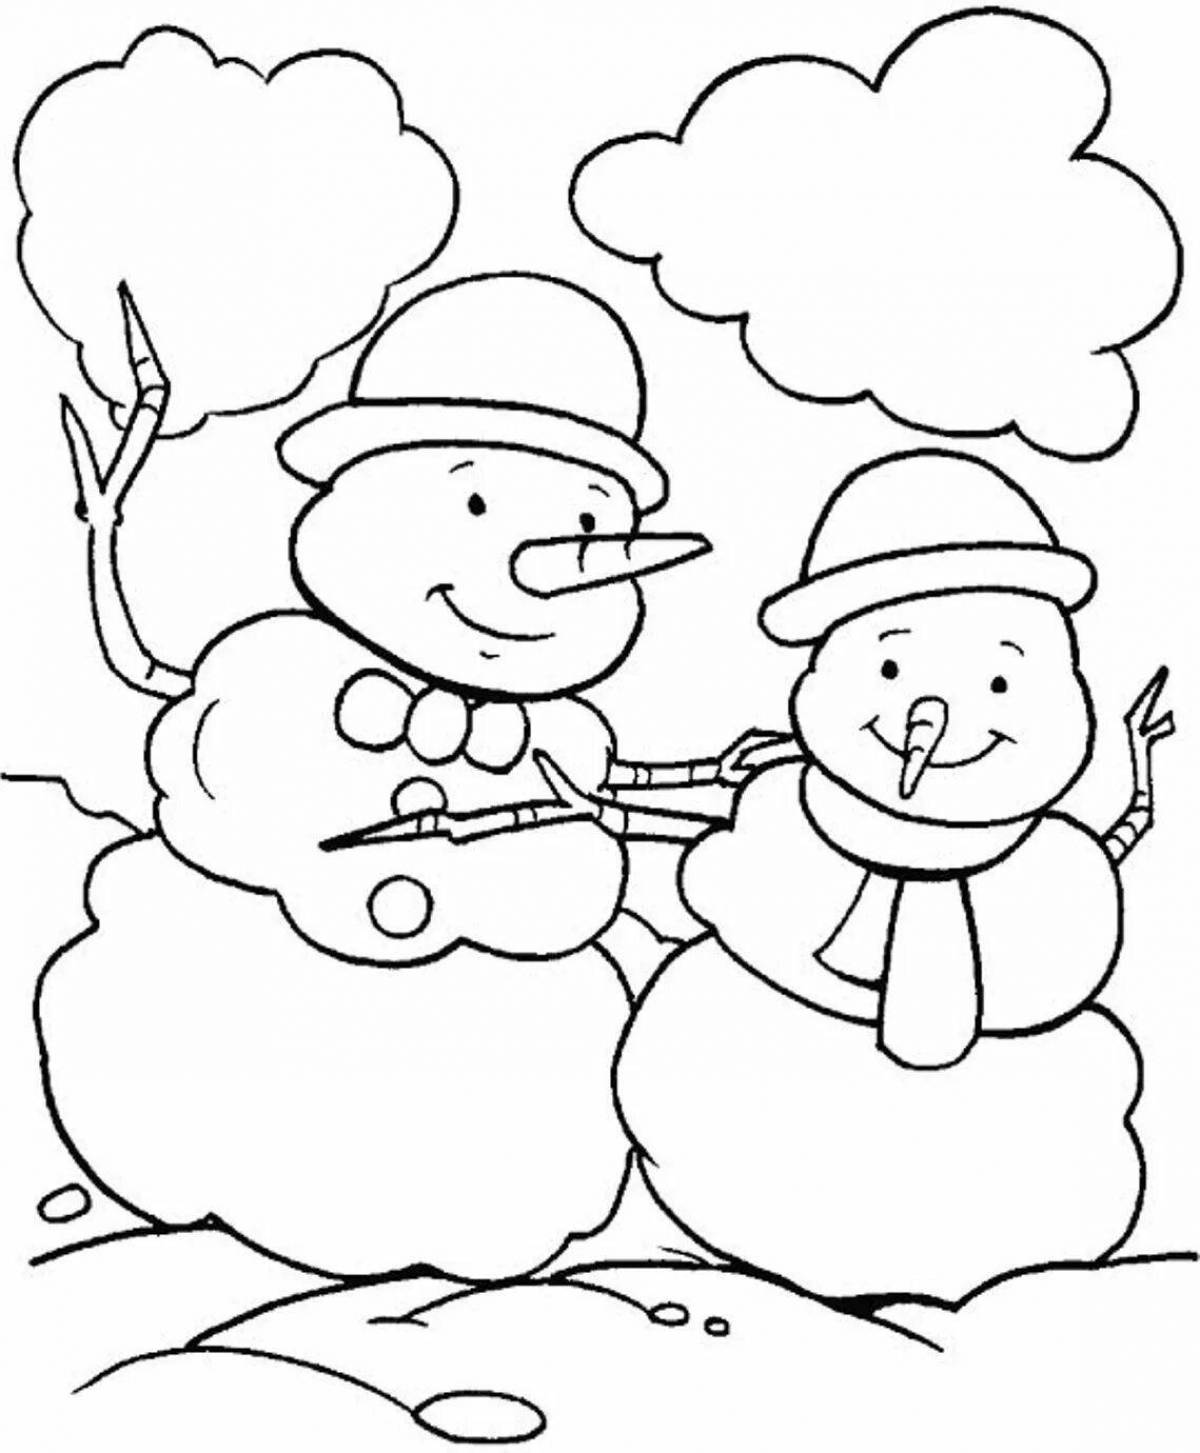 A fun snowman coloring book for kids